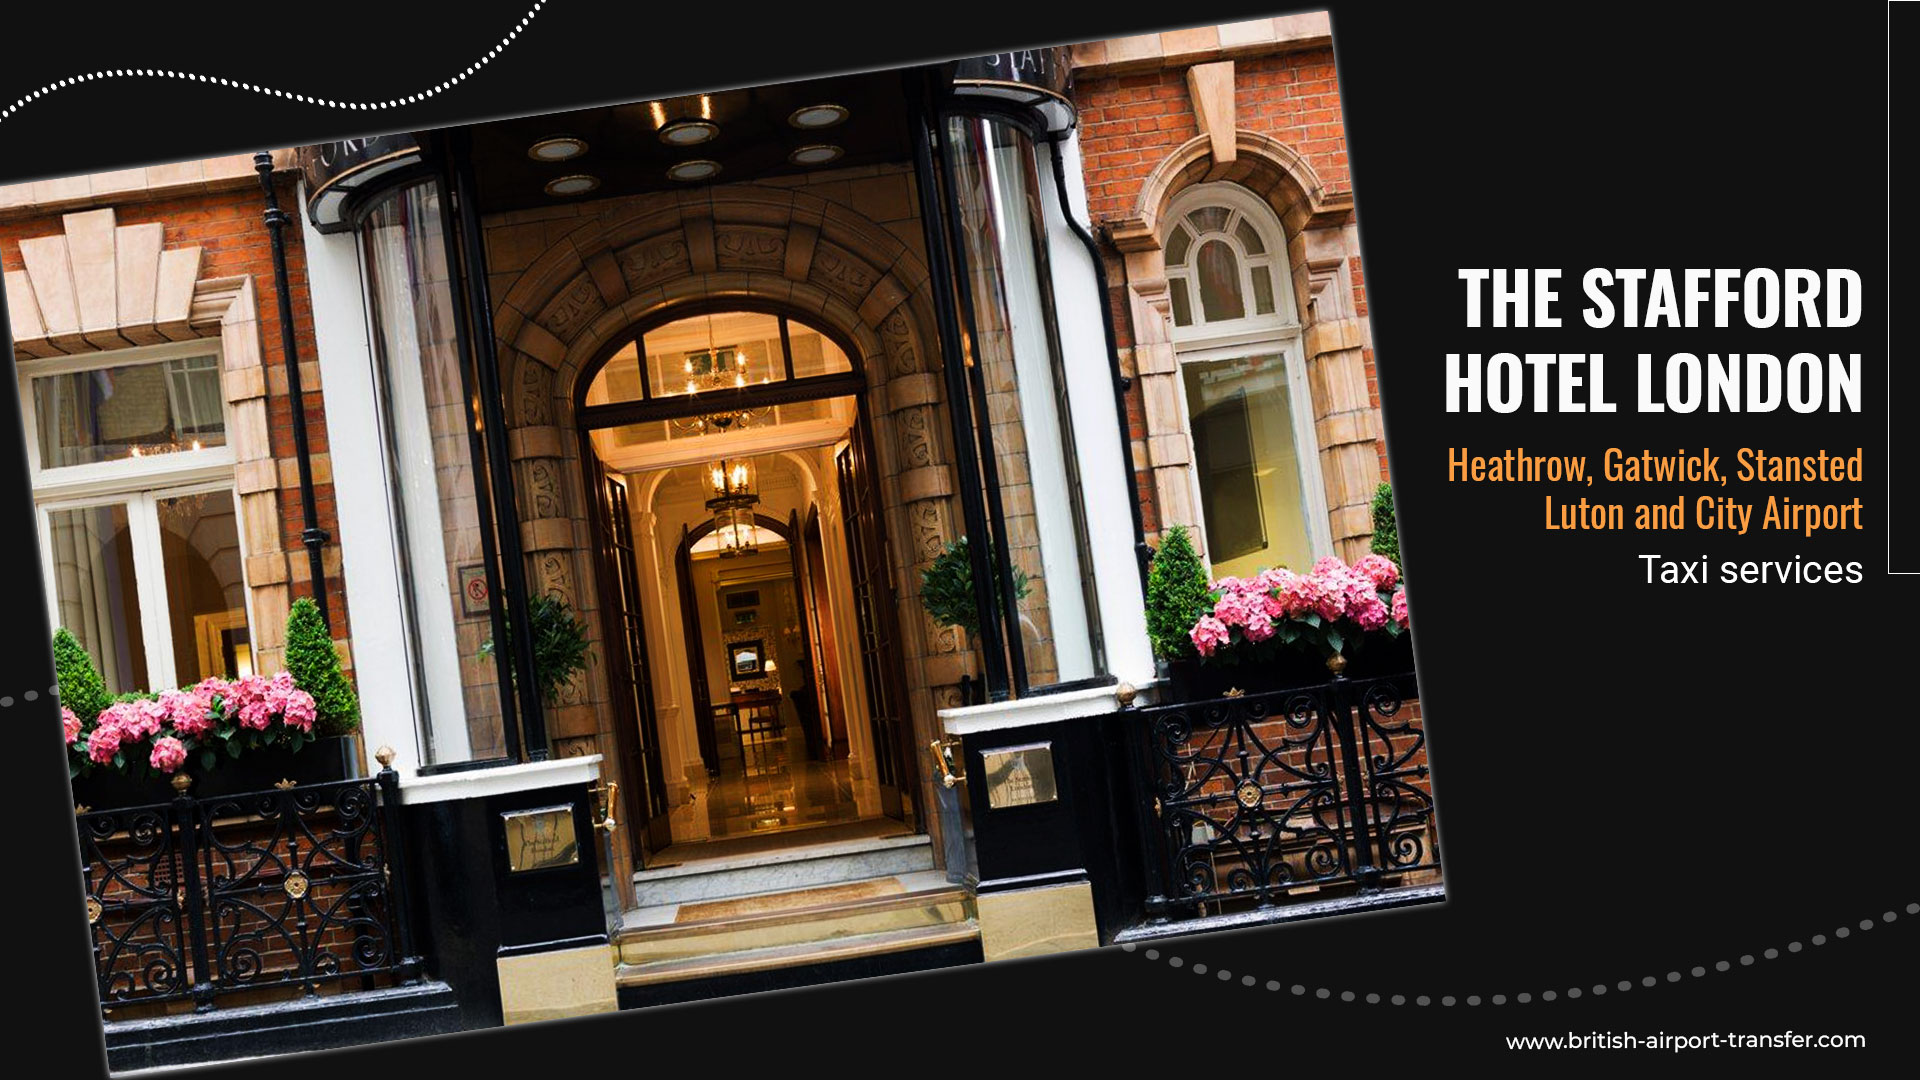 Taxi Service – The Stafford Hotel London / SW1A 1NJ